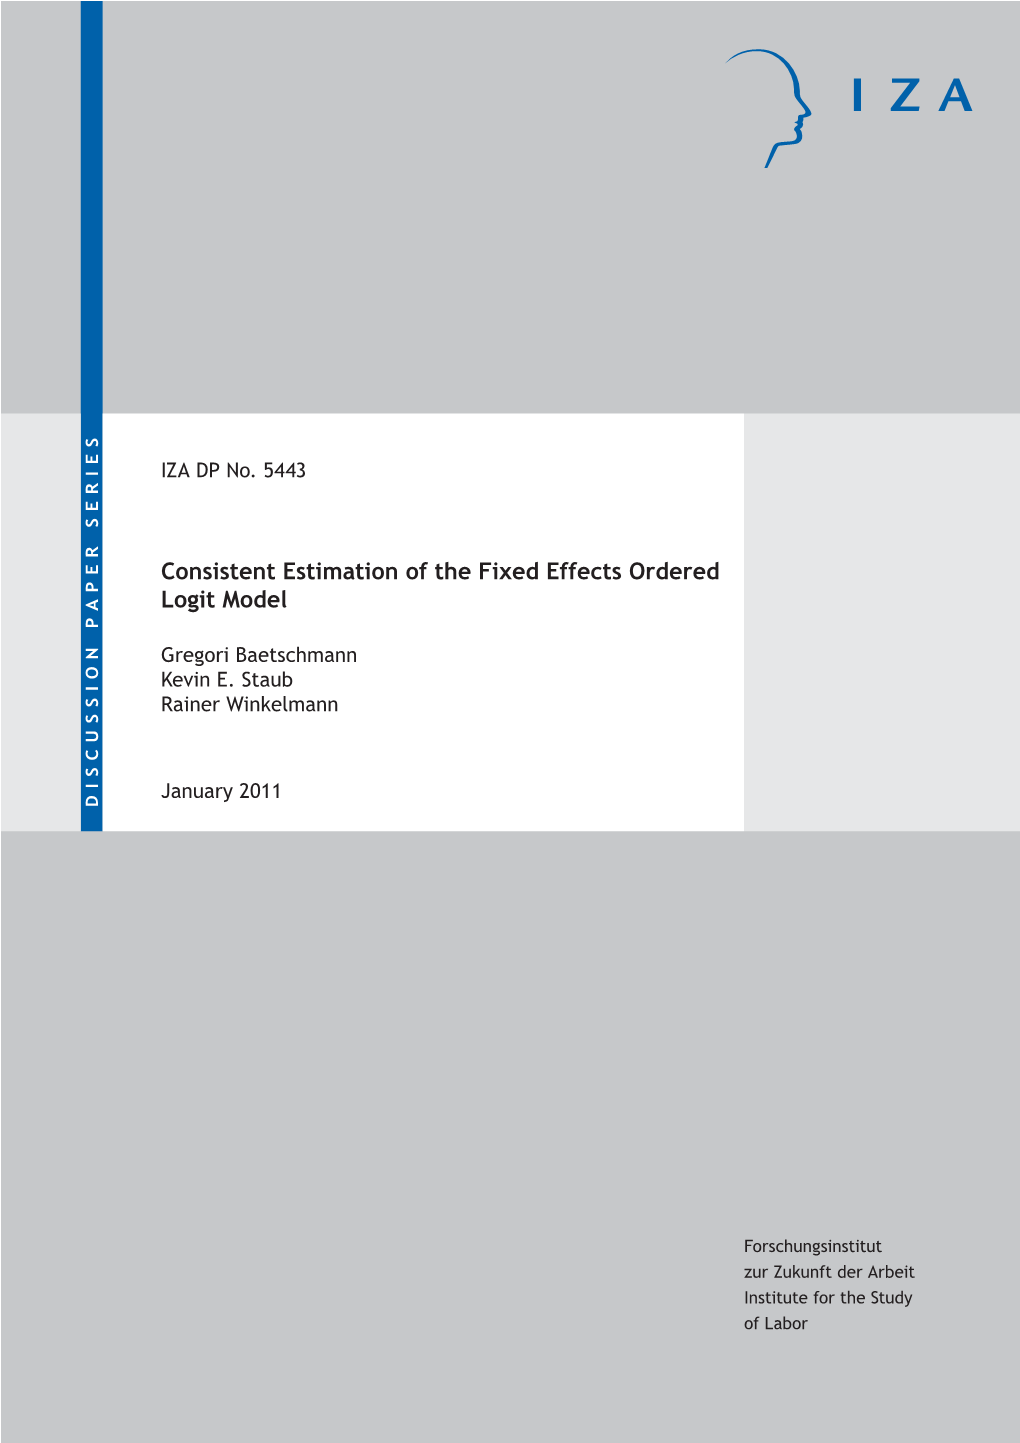 Consistent Estimation of the Fixed Effects Ordered Logit Model